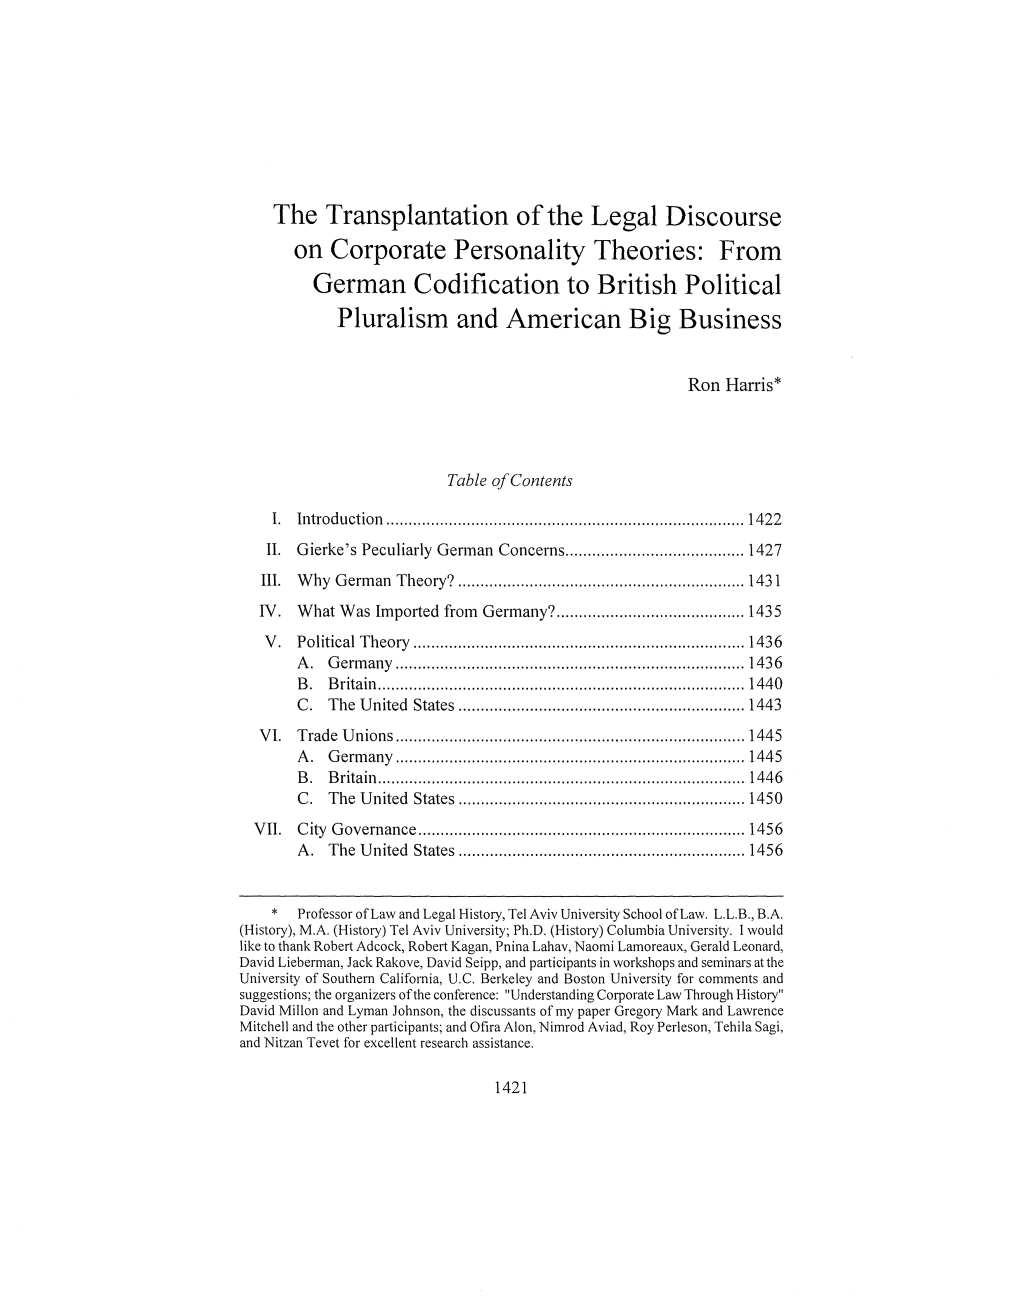 The Transplantation Ofthe Legal Discourse on Corporate Personality Theories: from German Codification to British Political Pluralism and American Big Business